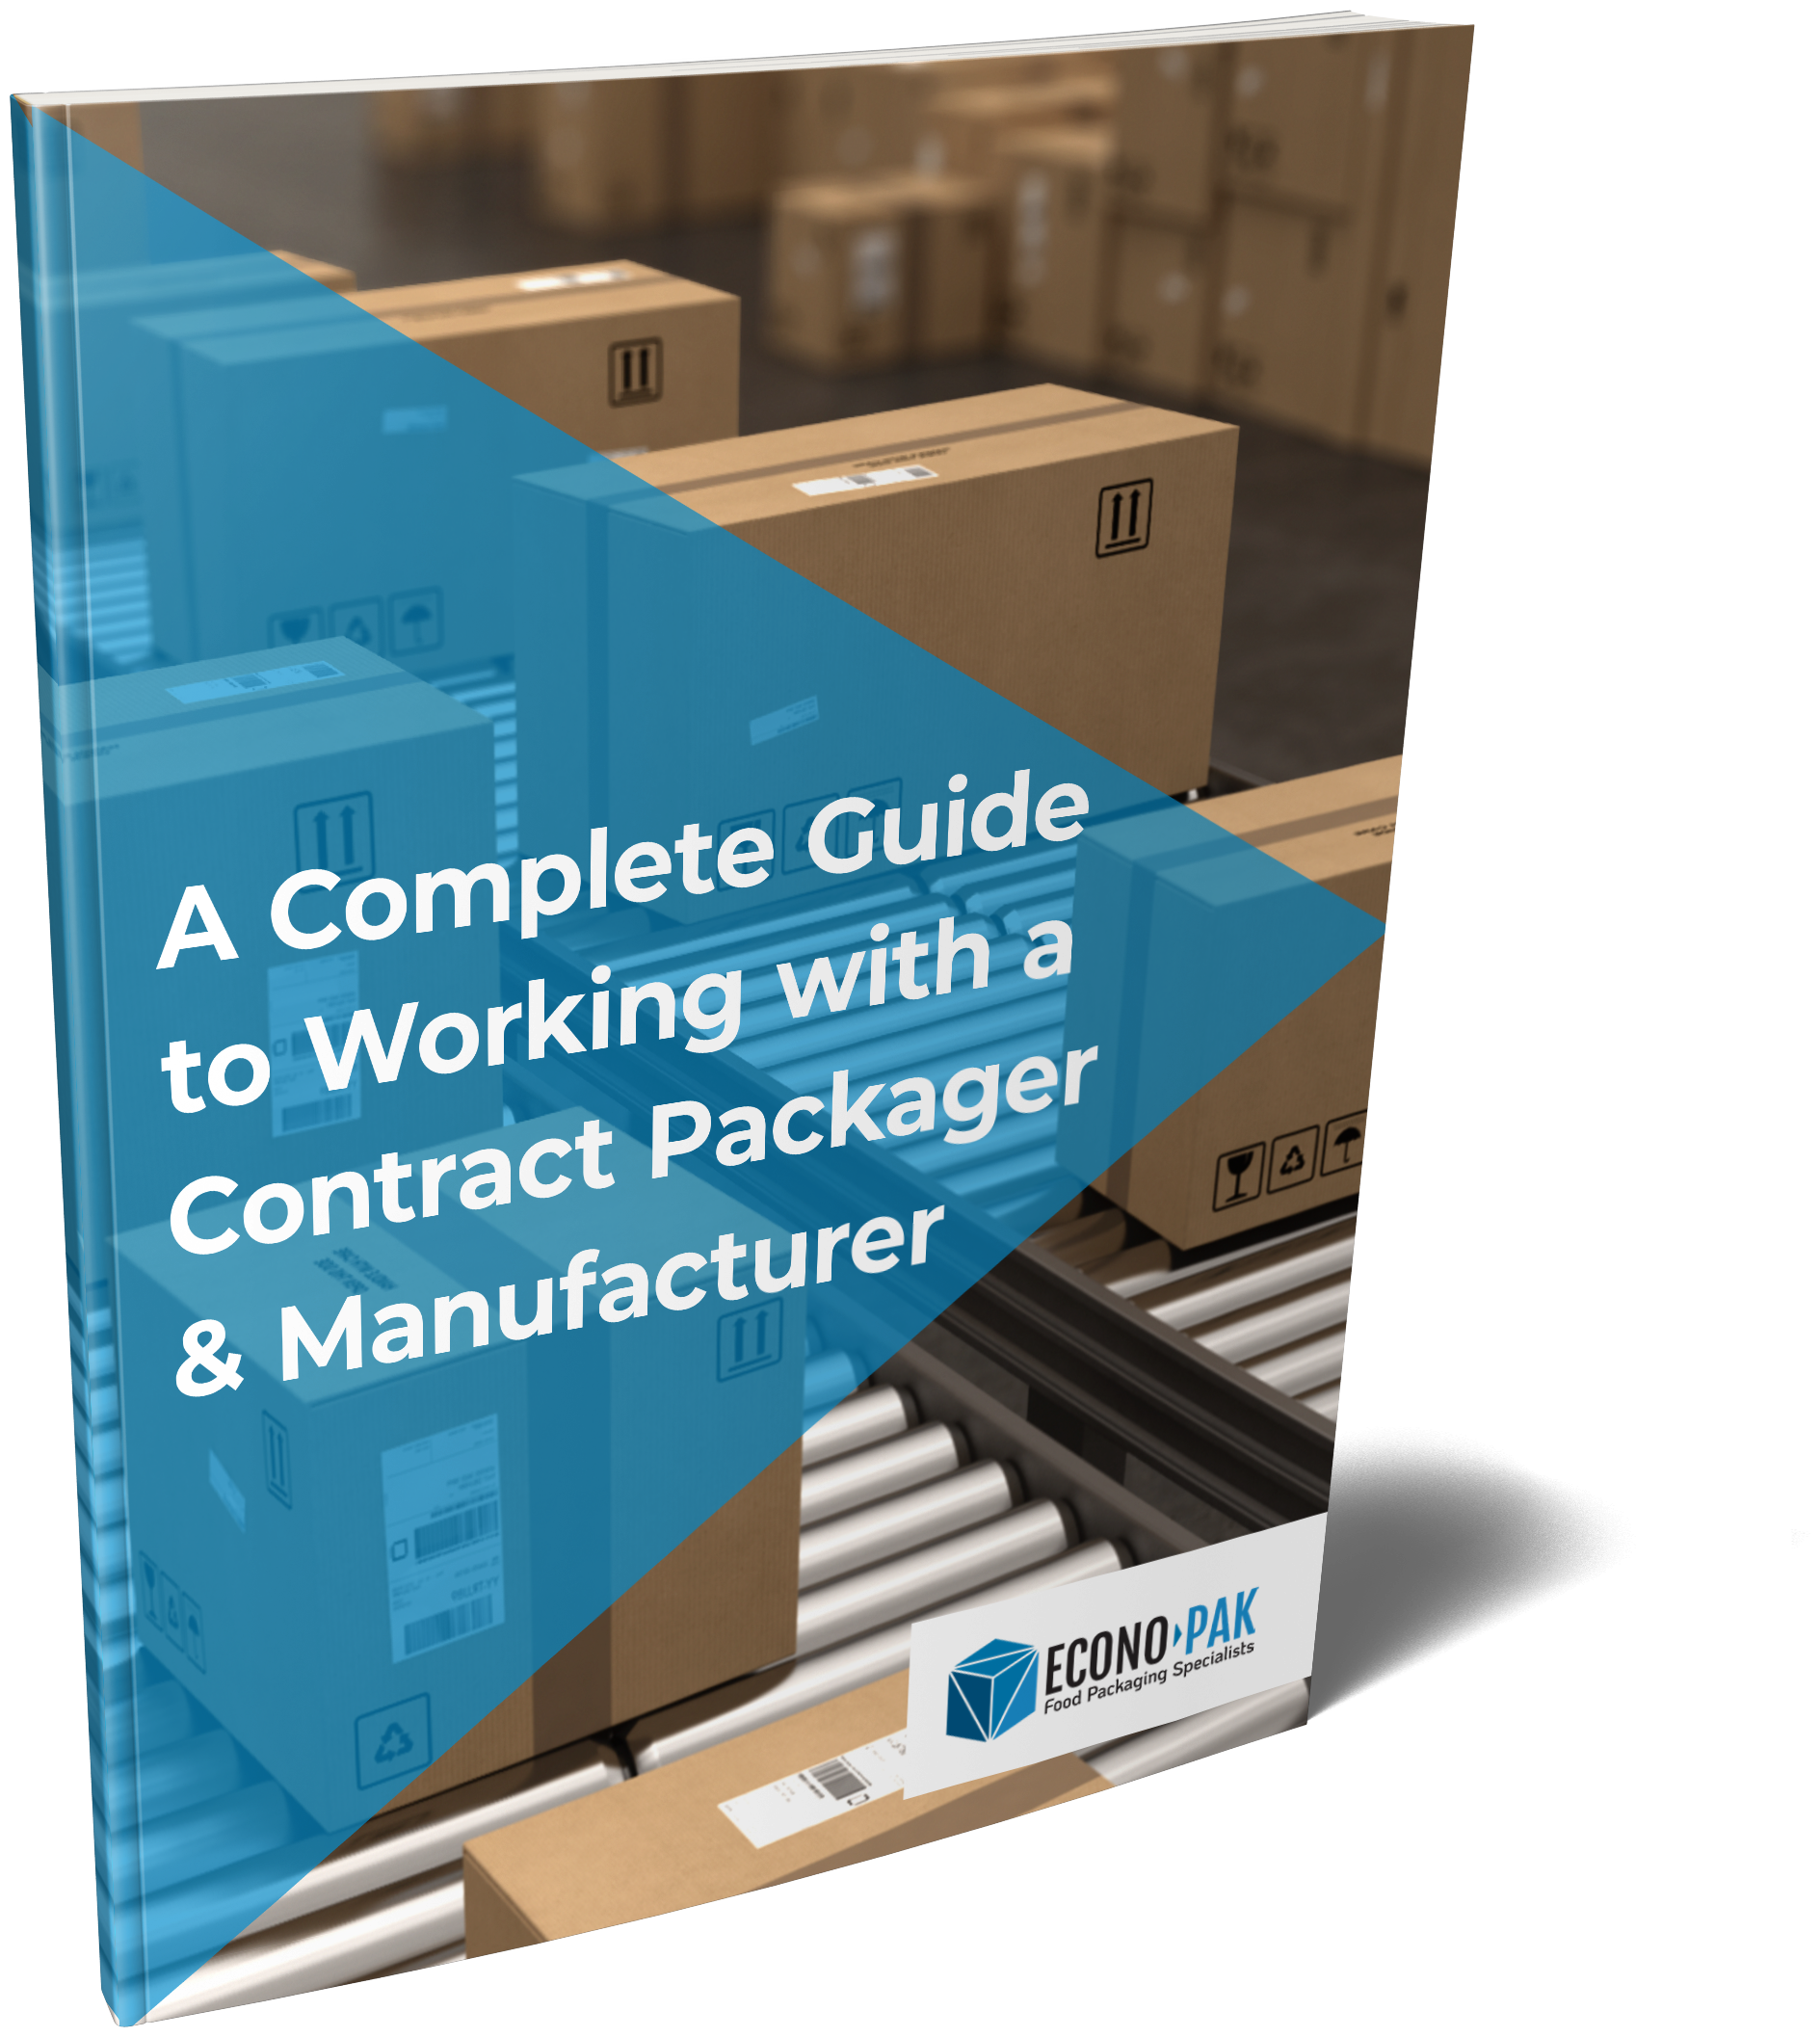 3D-Cover-A-Complete-Guide-to-Working-with-a-Contract-Packager-&-Manufacturer